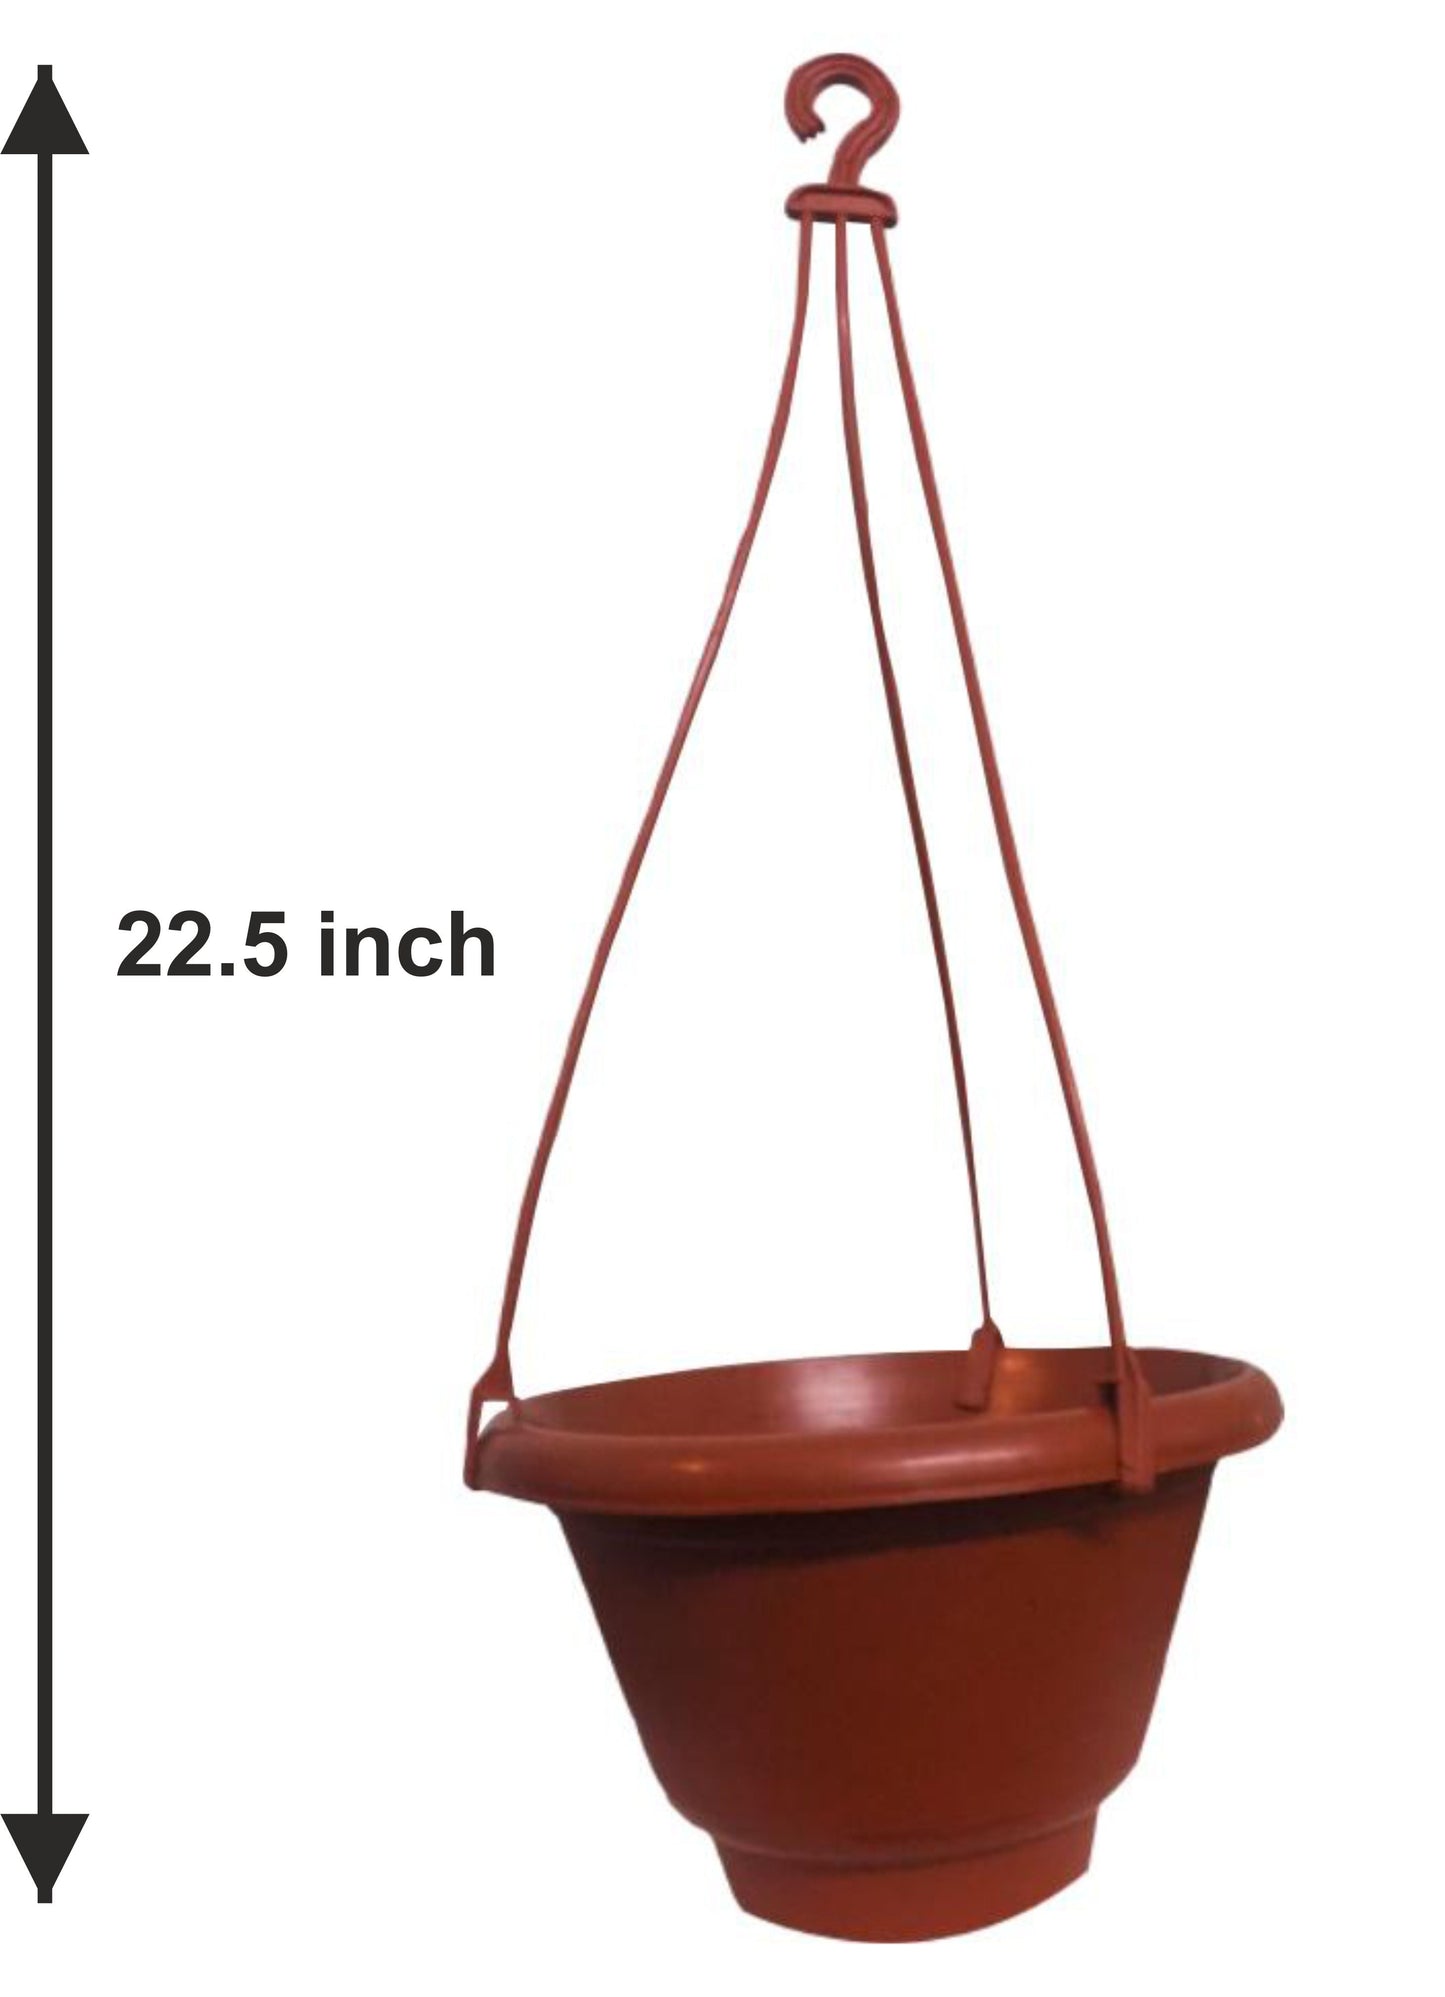 HANGING FLOWER POT WITH ROPE